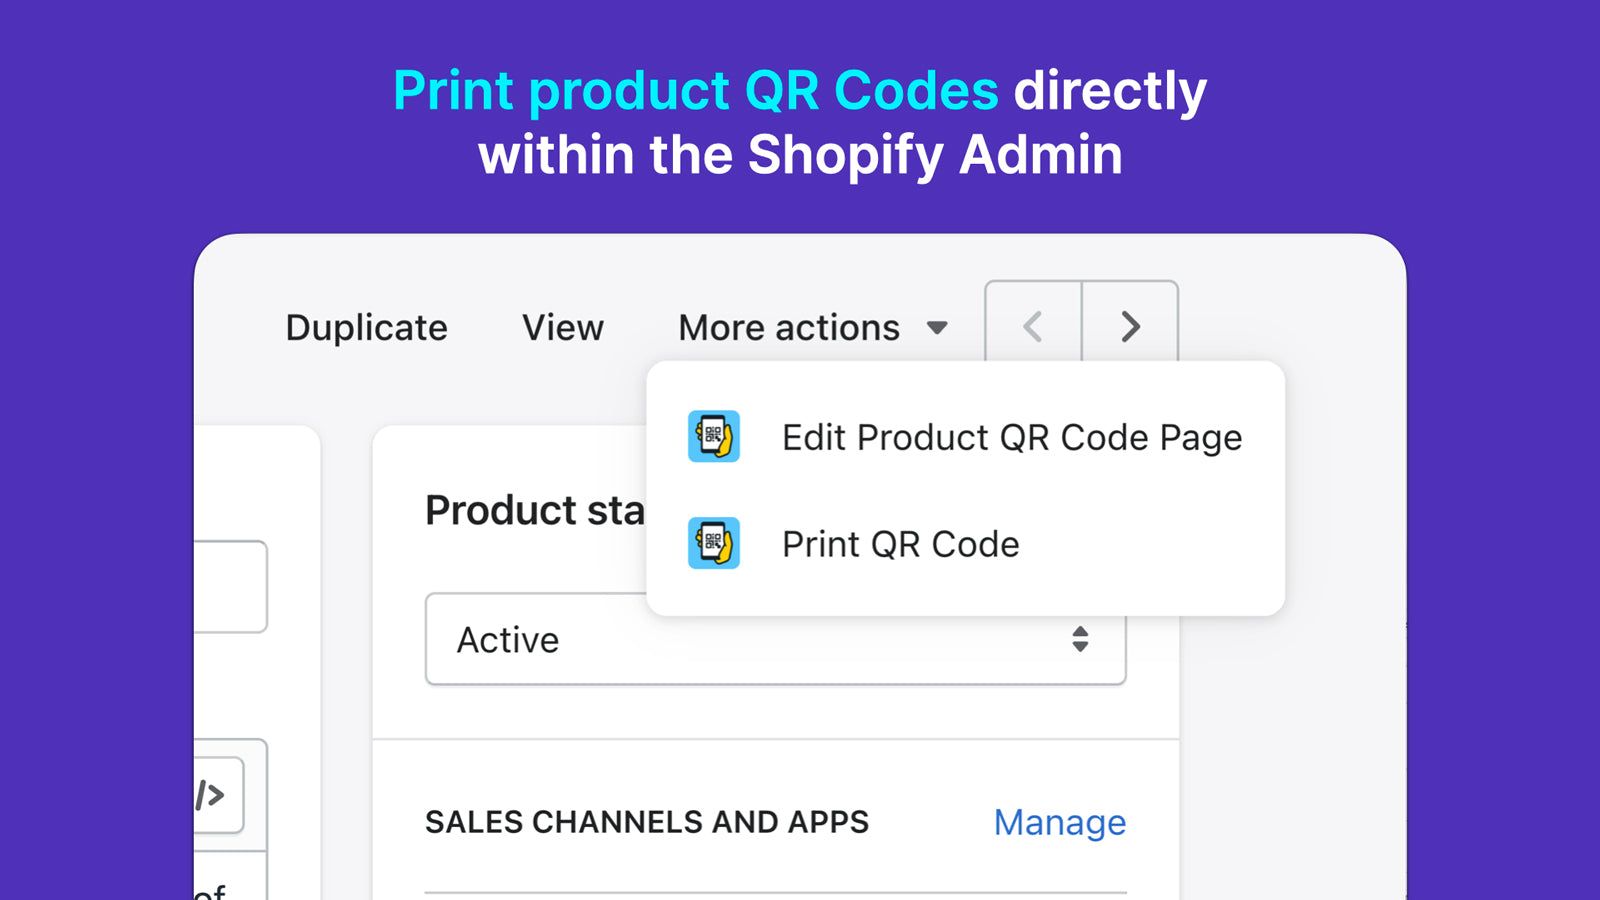 Print Product QR Codes directly from the Shopify Admin